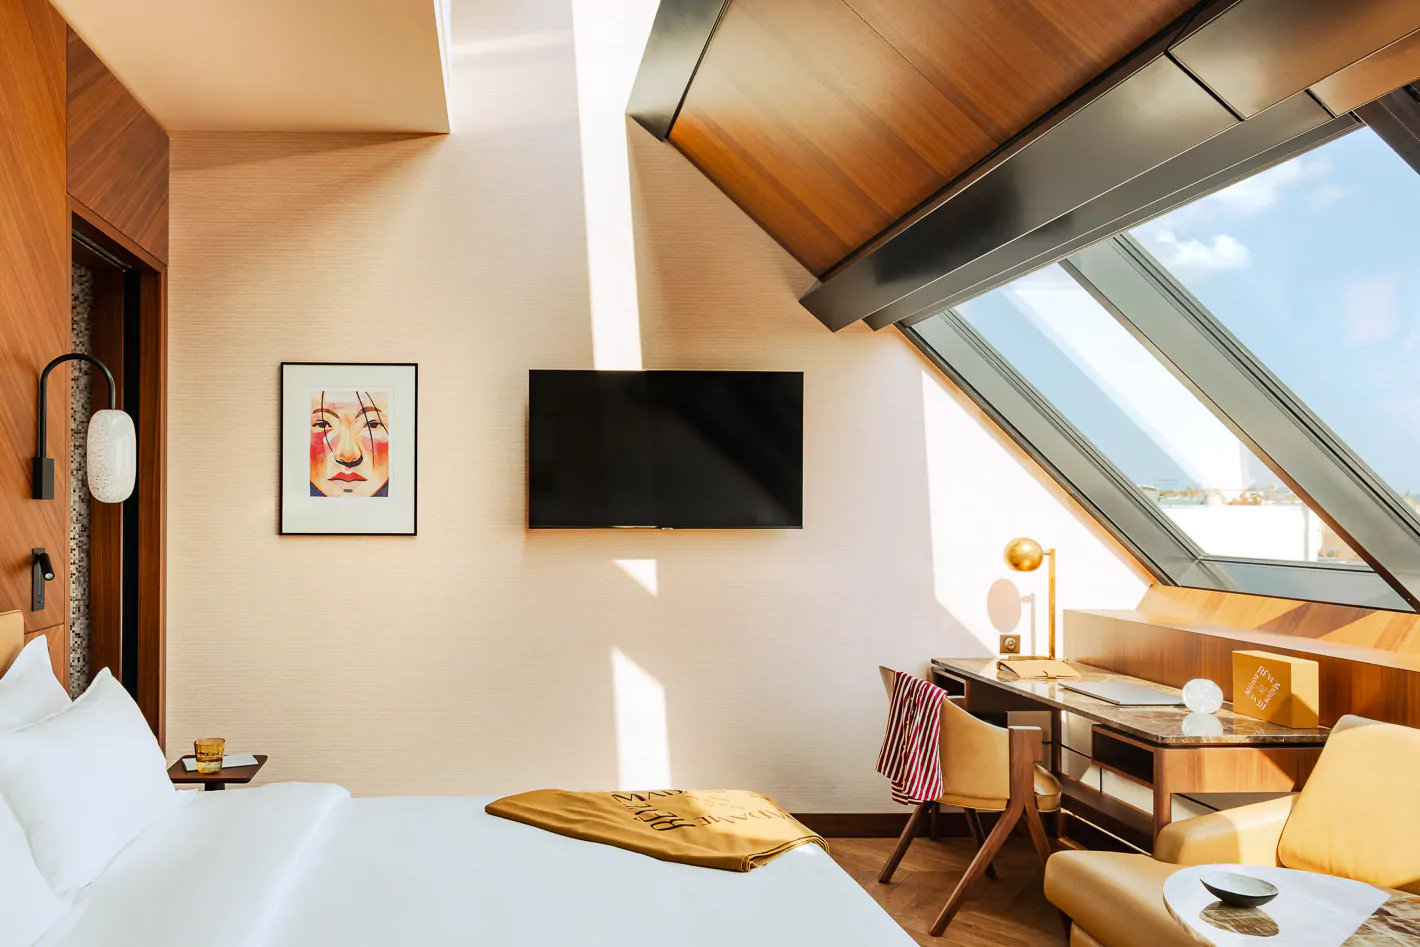 Chic and modern room at Madame Reve in Paris, with a sleek design featuring a plush bed, striking artwork, and a wall-mounted TV. Natural light pours in through the large angled window, offering a glimpse of the Parisian skyline.